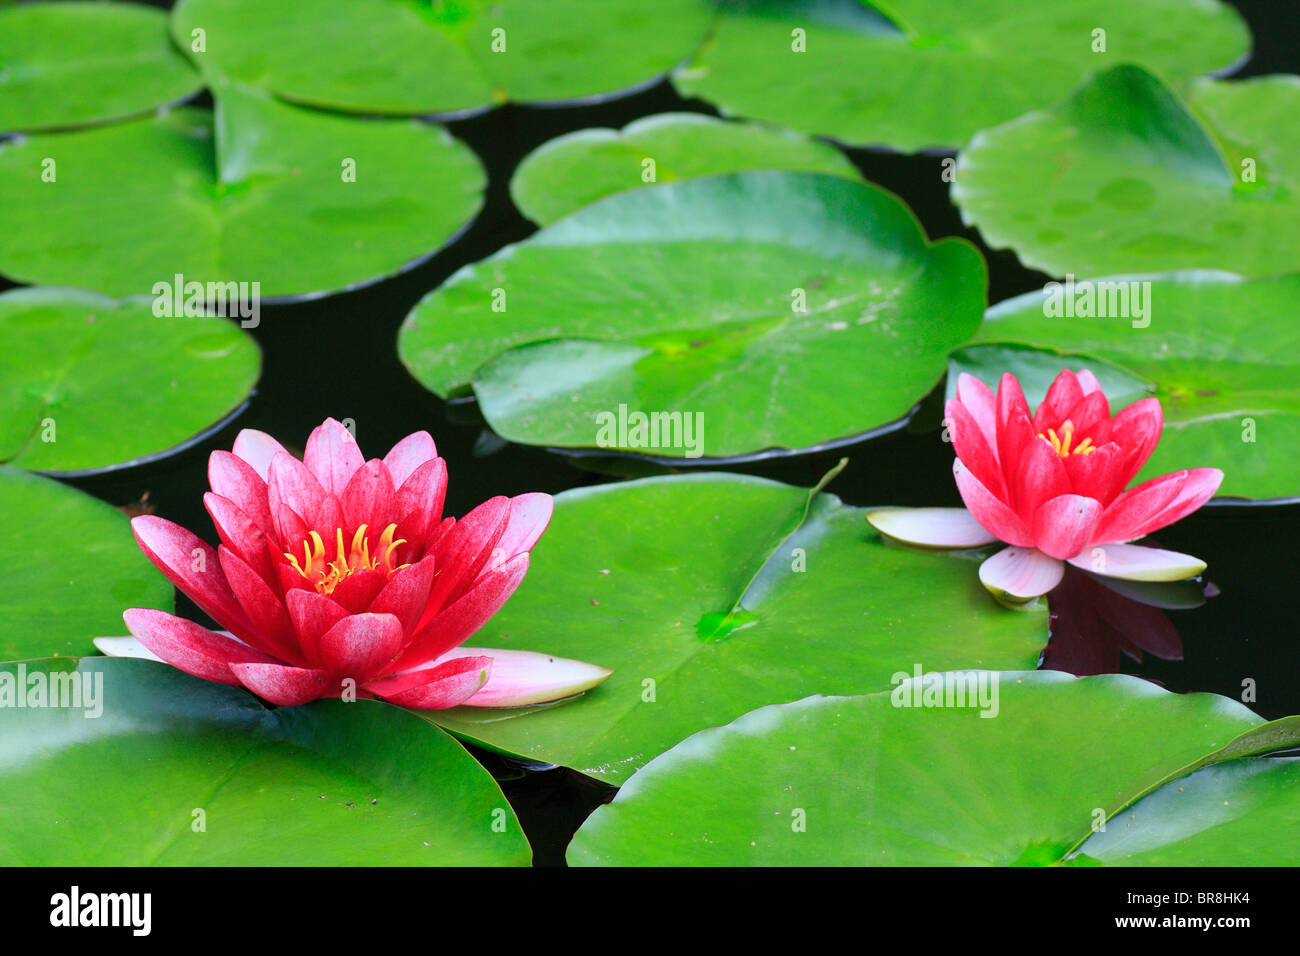 Water lilies, close up Stock Photo